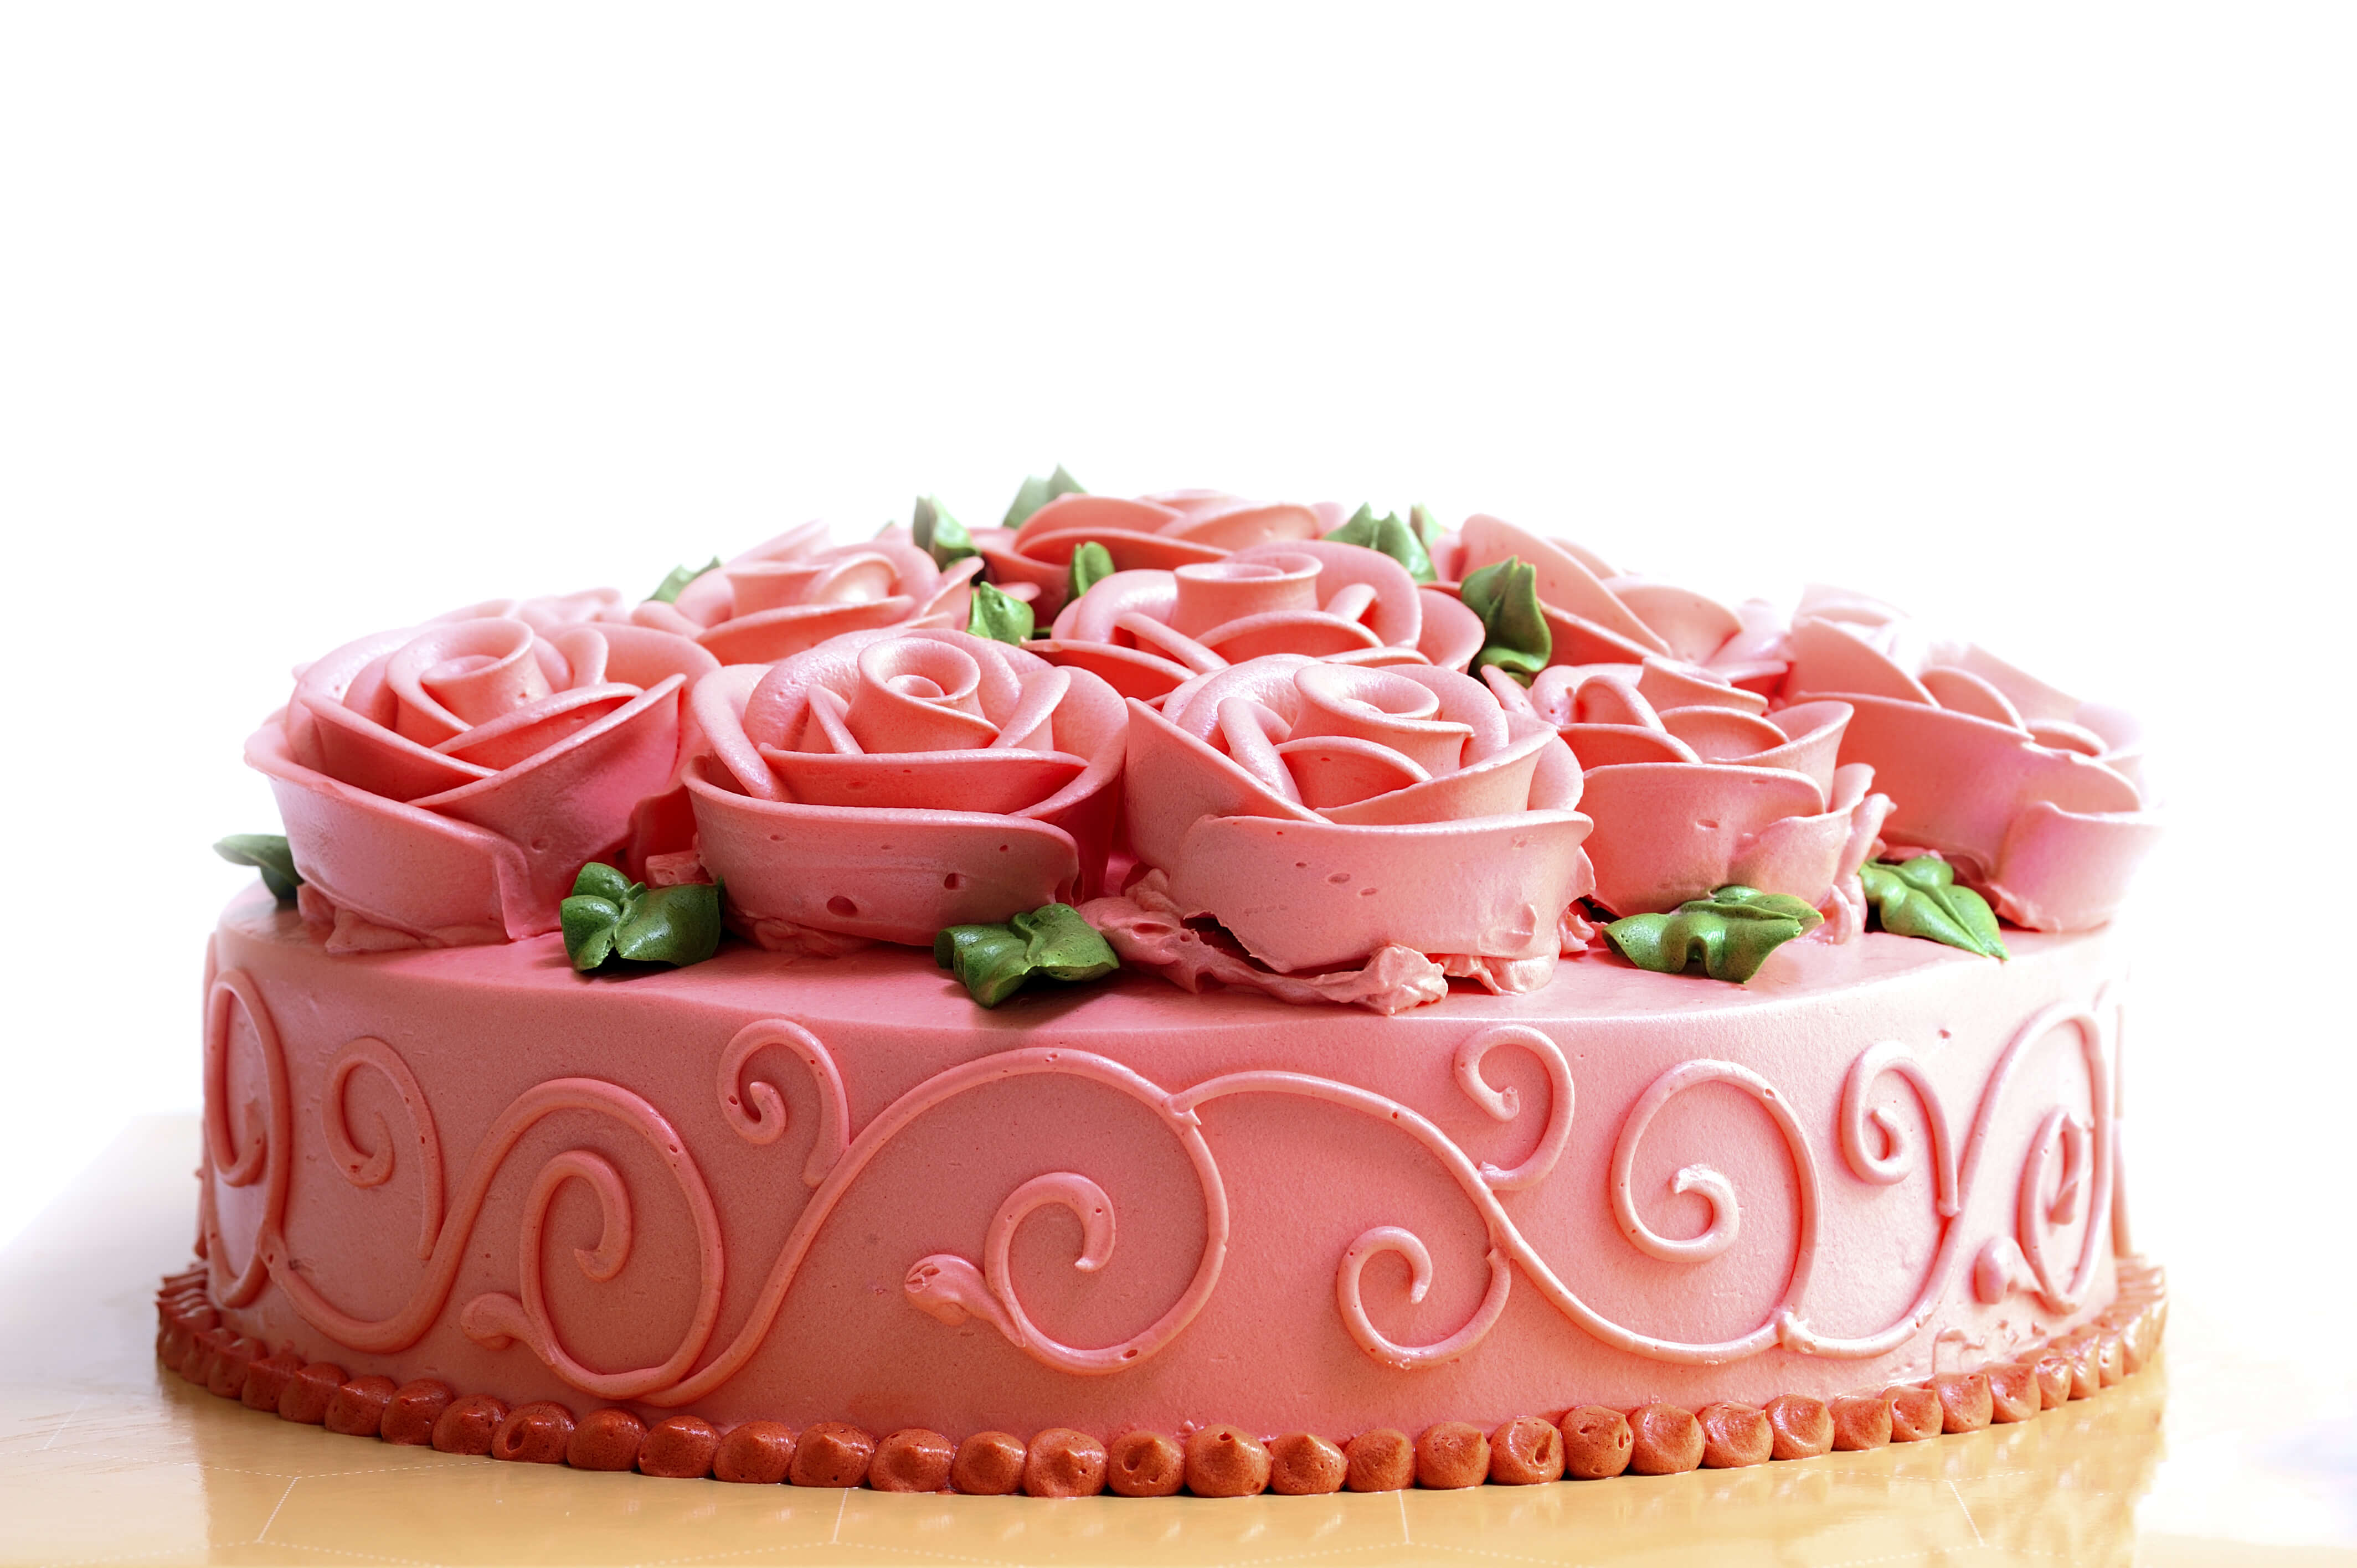 A Beginner's Guide to Cake Decorating (with Infographic)